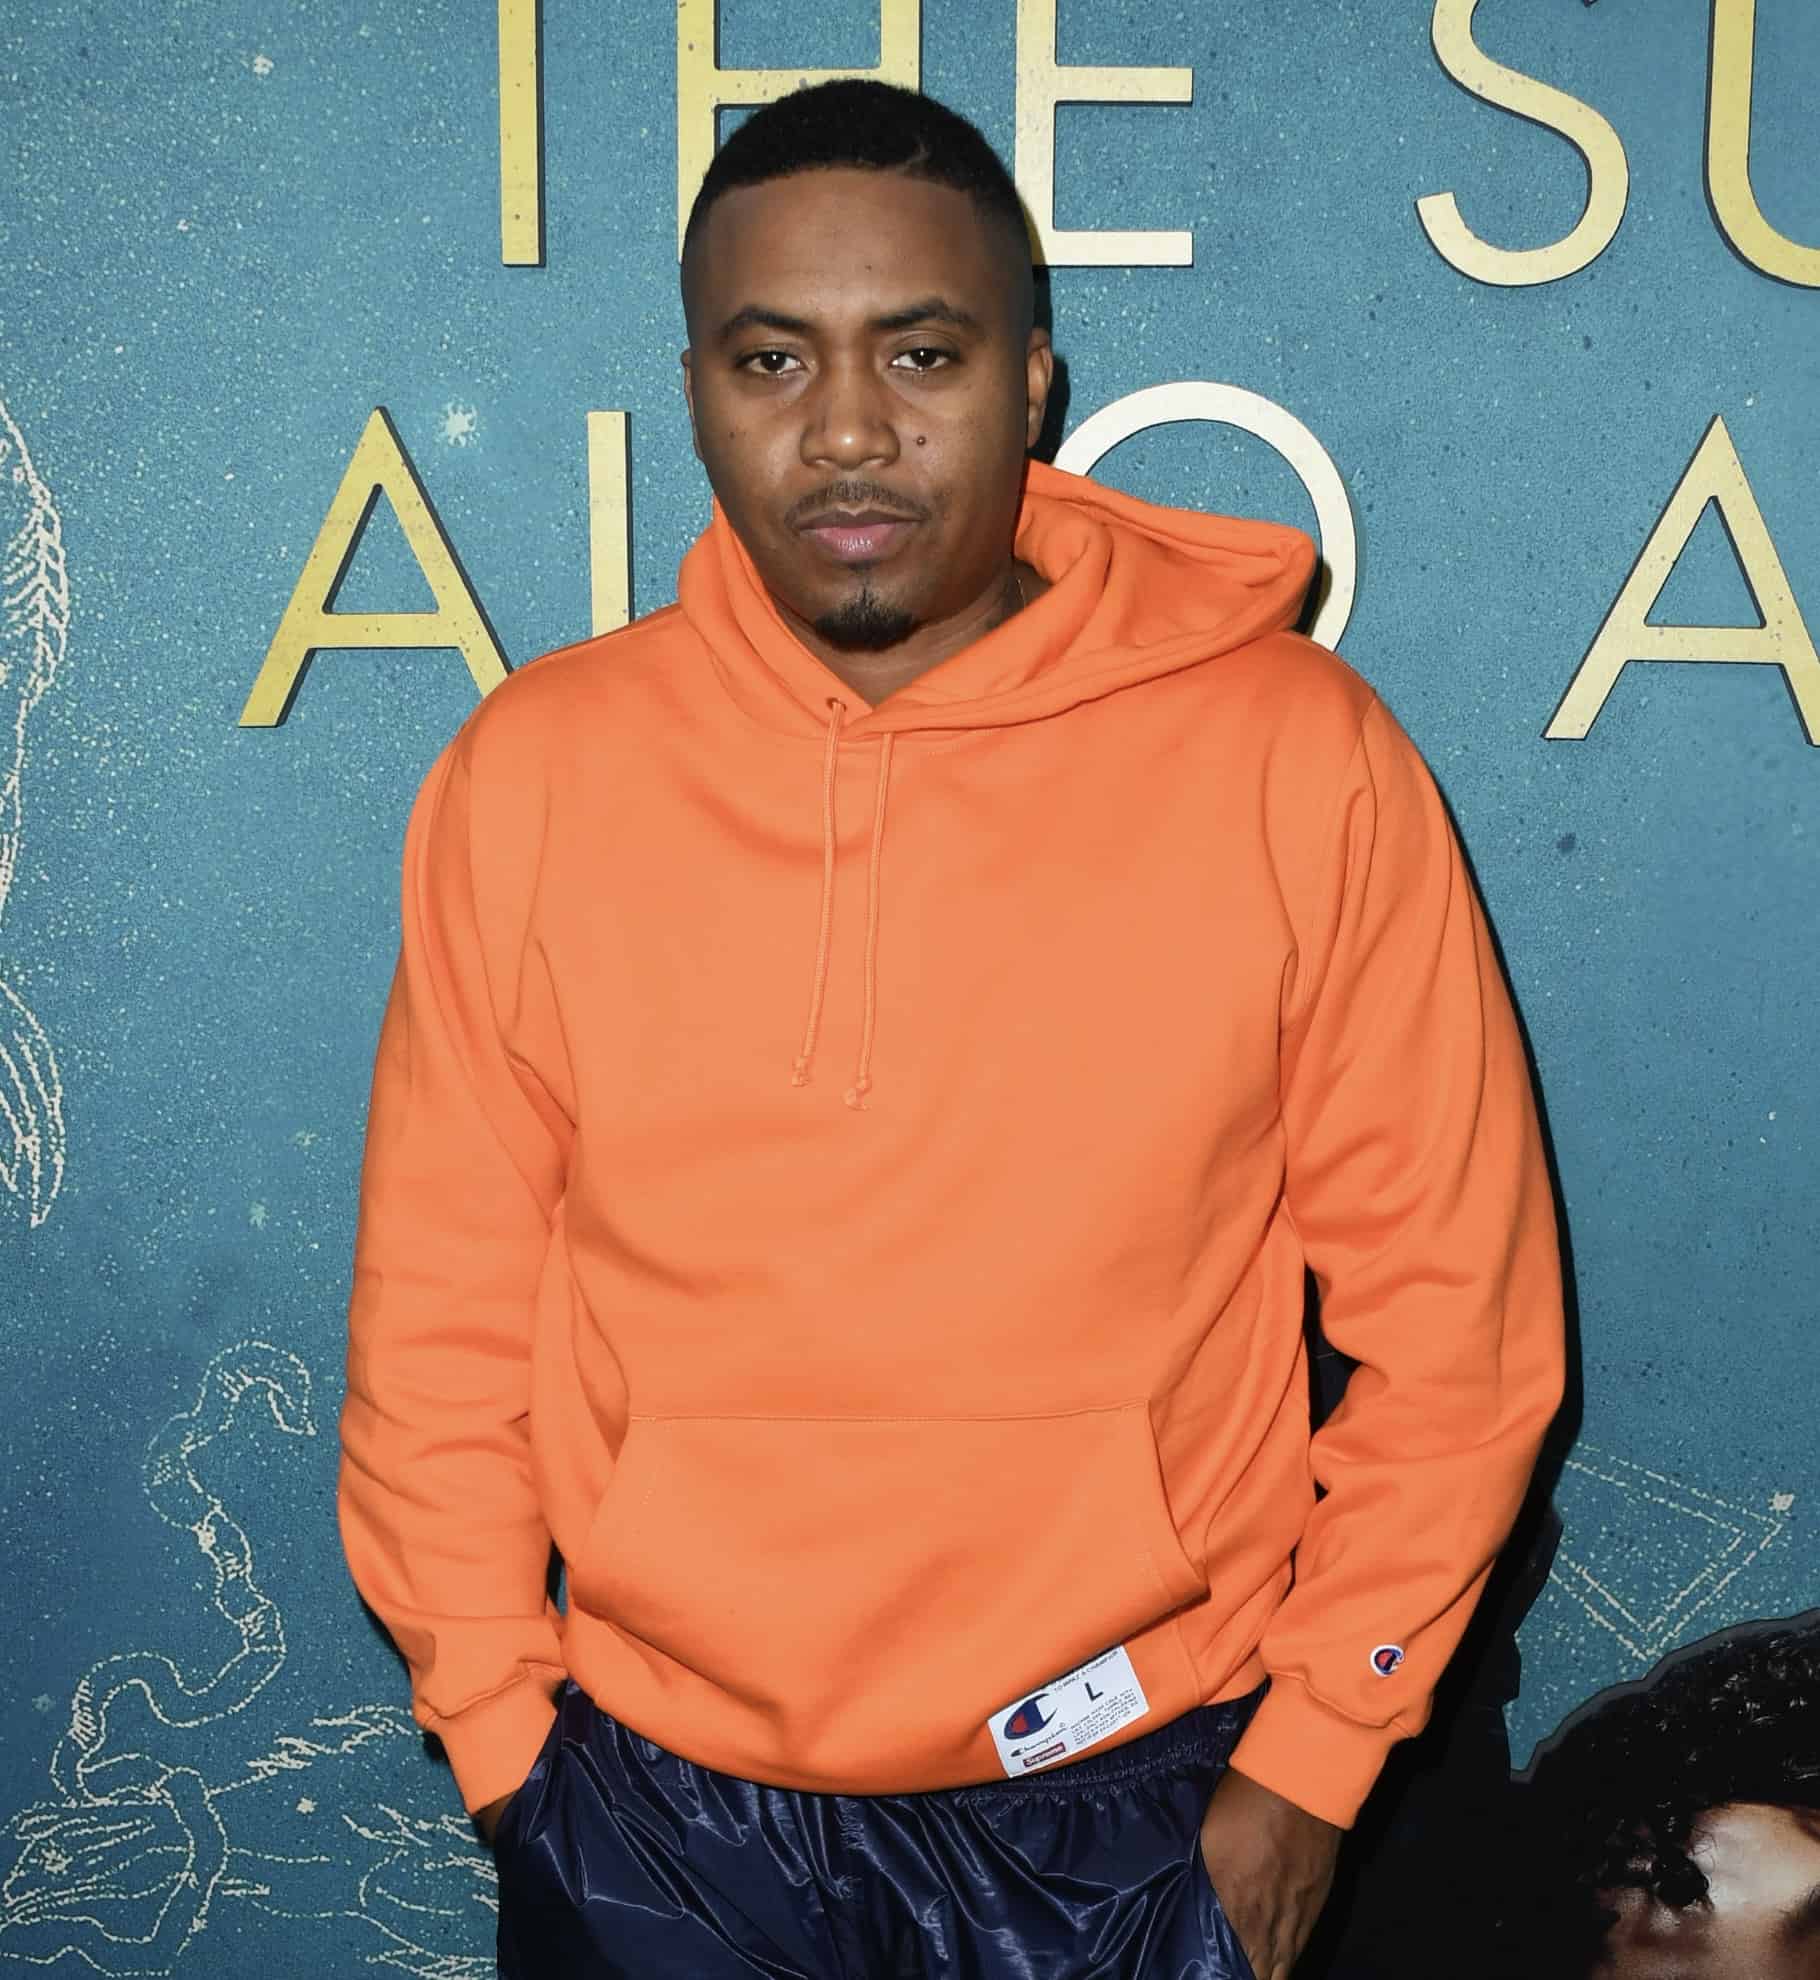 Nas Shares His Opinion About Today's Rappers, Says “There's No One